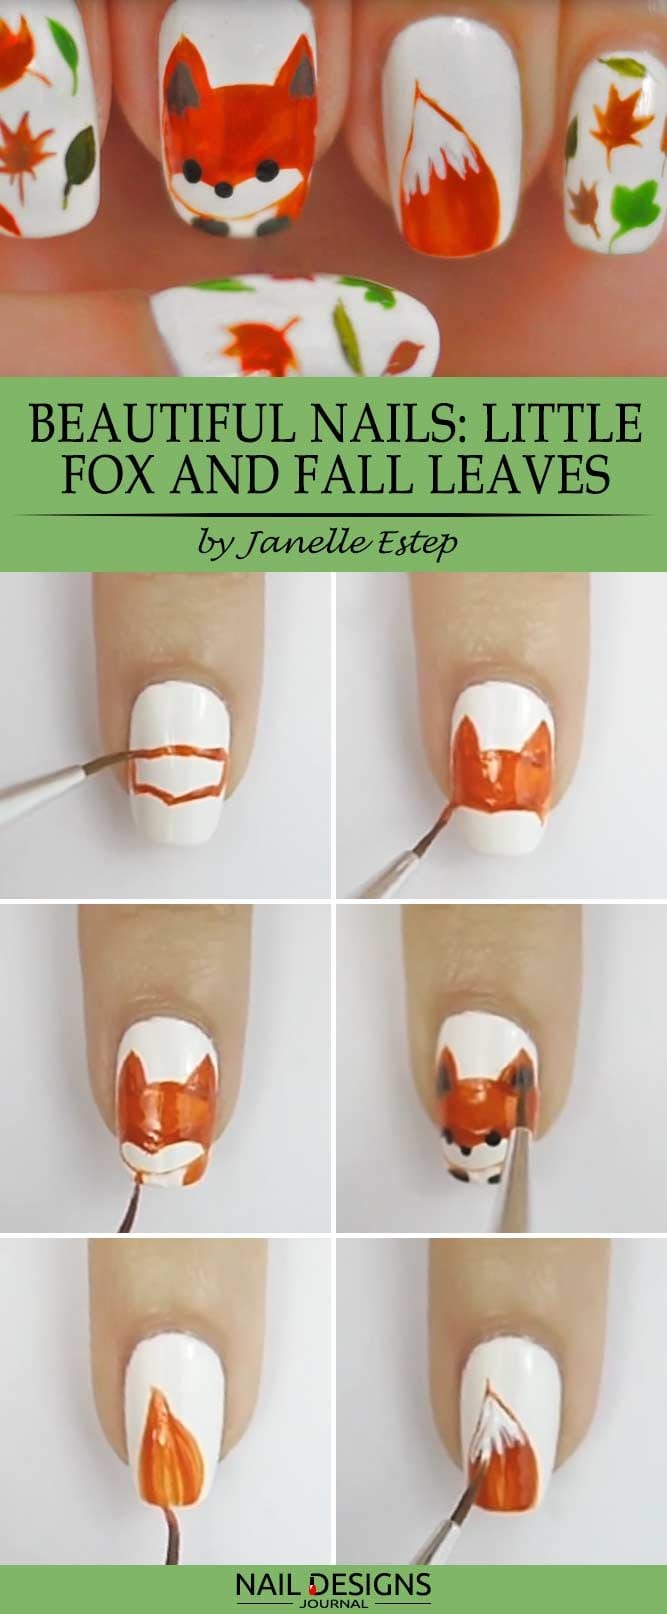 [ad_1]

When we think about simple nail designs, we for sure want them to look cute and extraordinary, too. That is why we have come up with a thought that depicting a little fox on your nails may do the trick.…